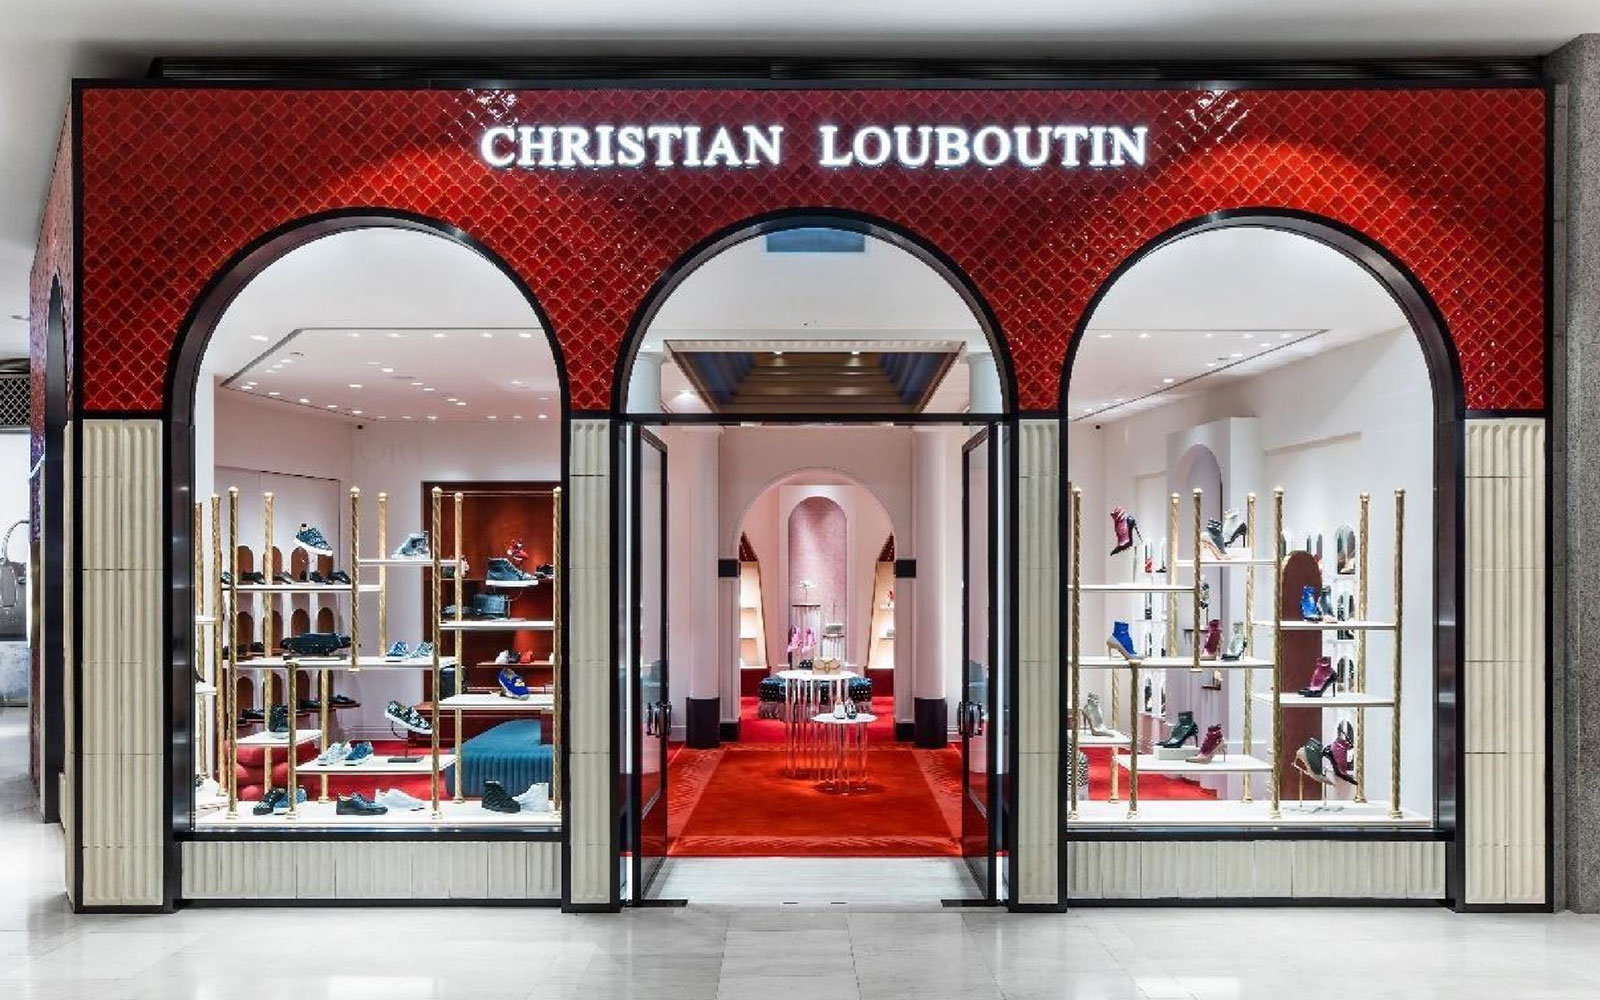 A look inside Christian Louboutin’s first boutique in Malaysia